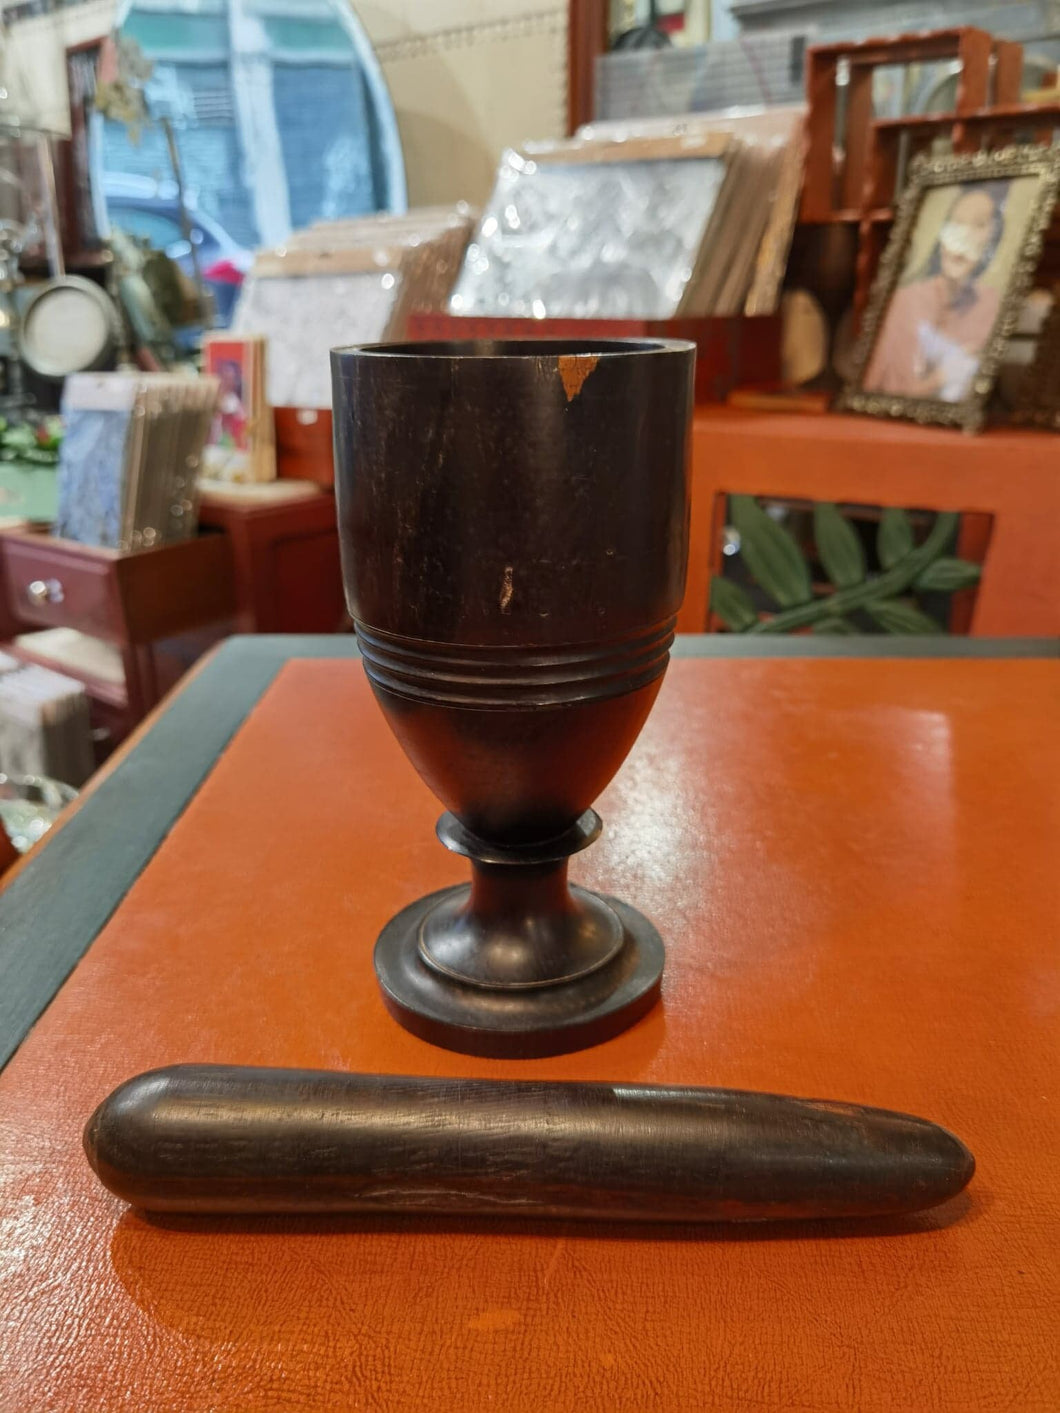 This is a unique African Etched Ebony Mortar and Pestle from Mozambique dated from 1970’s